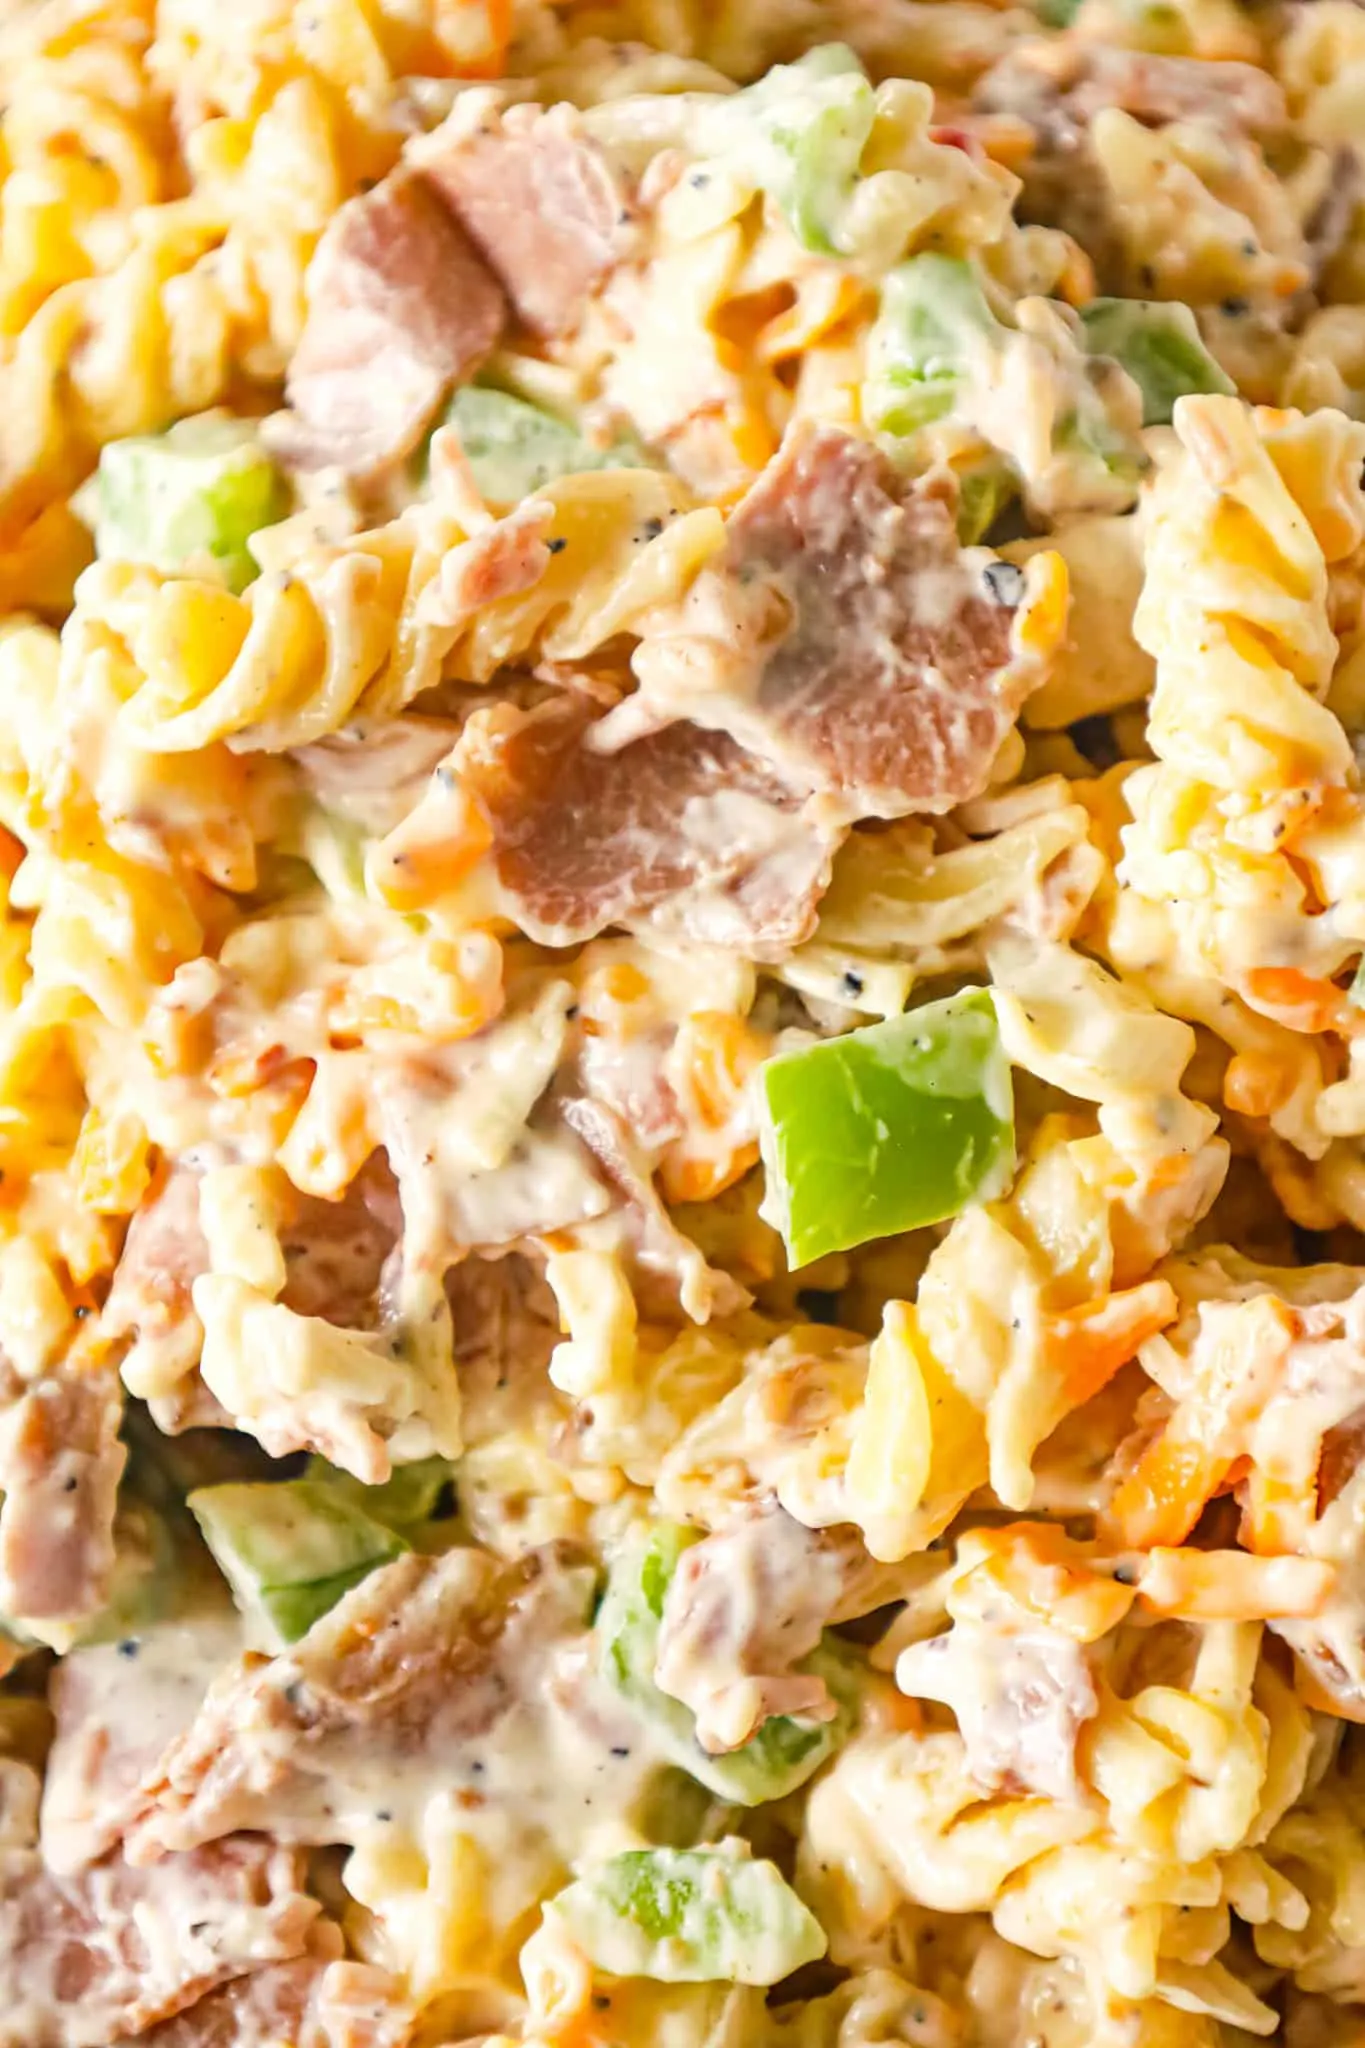 Philly Cheese Steak Pasta Salad is a tasty cold side dish recipe loaded with diced green peppers, onions, roast beef, mayo, shredded cheese and steak spice.